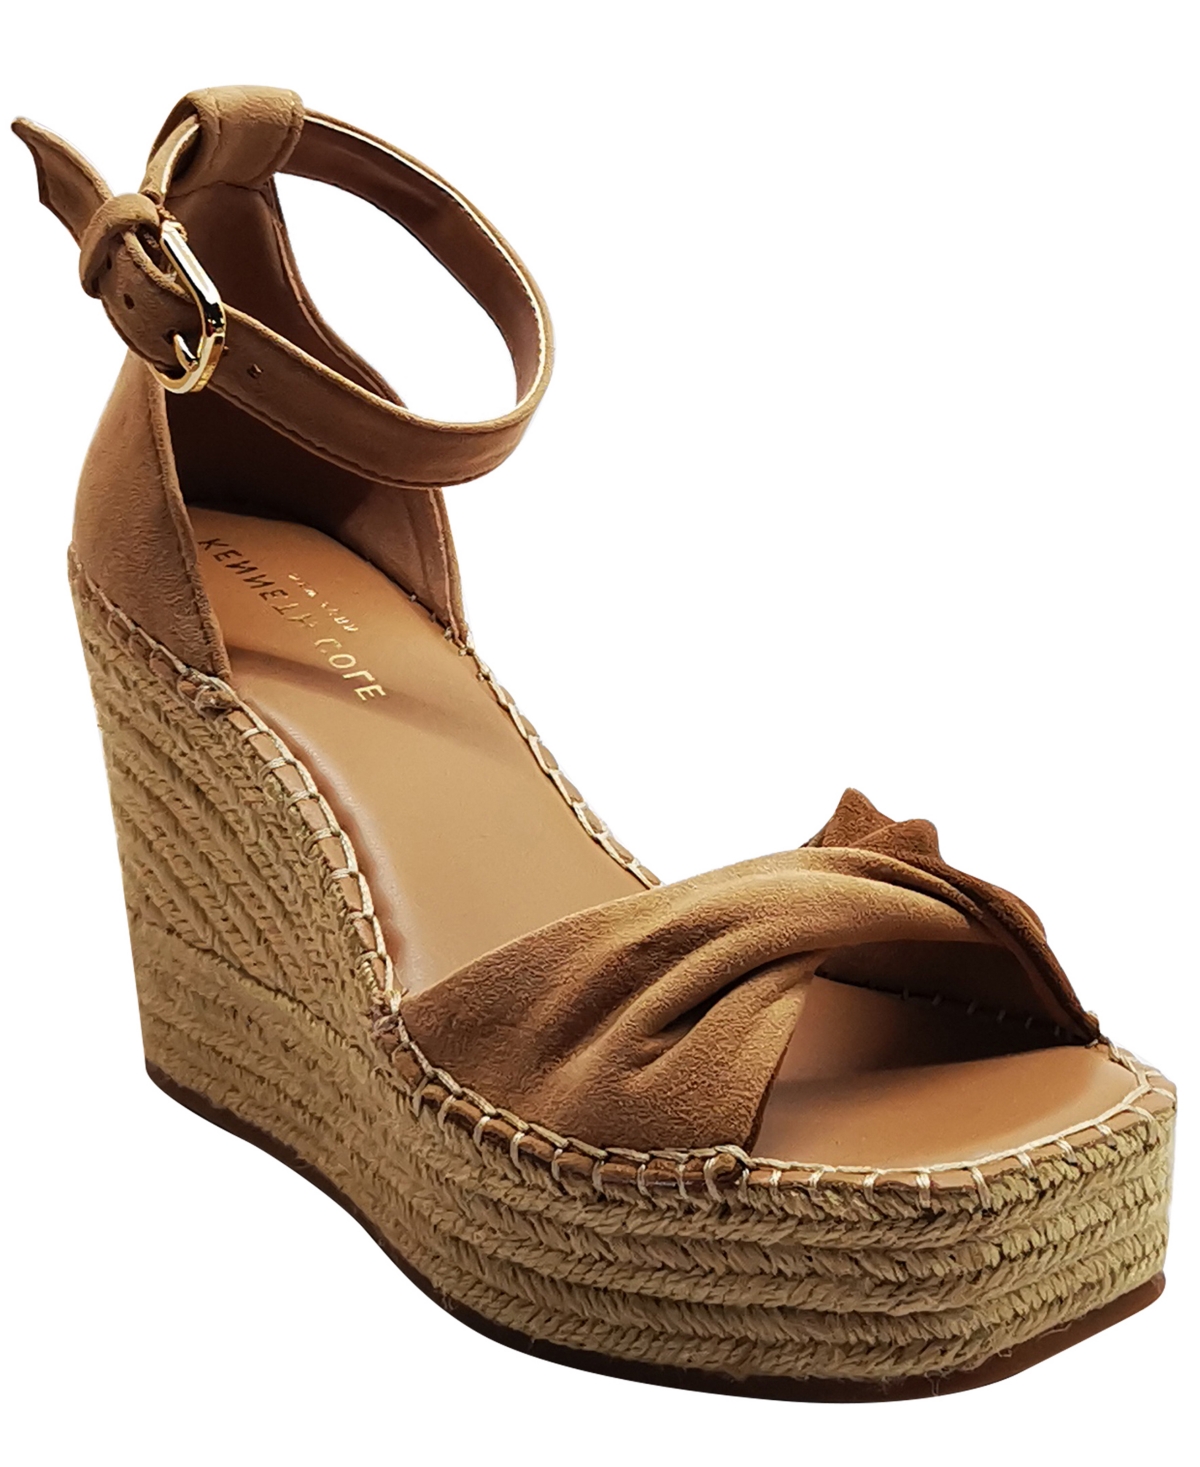 Kenneth Cole New York Women's Sol Espadrille Wedge Sandals Women's Shoes